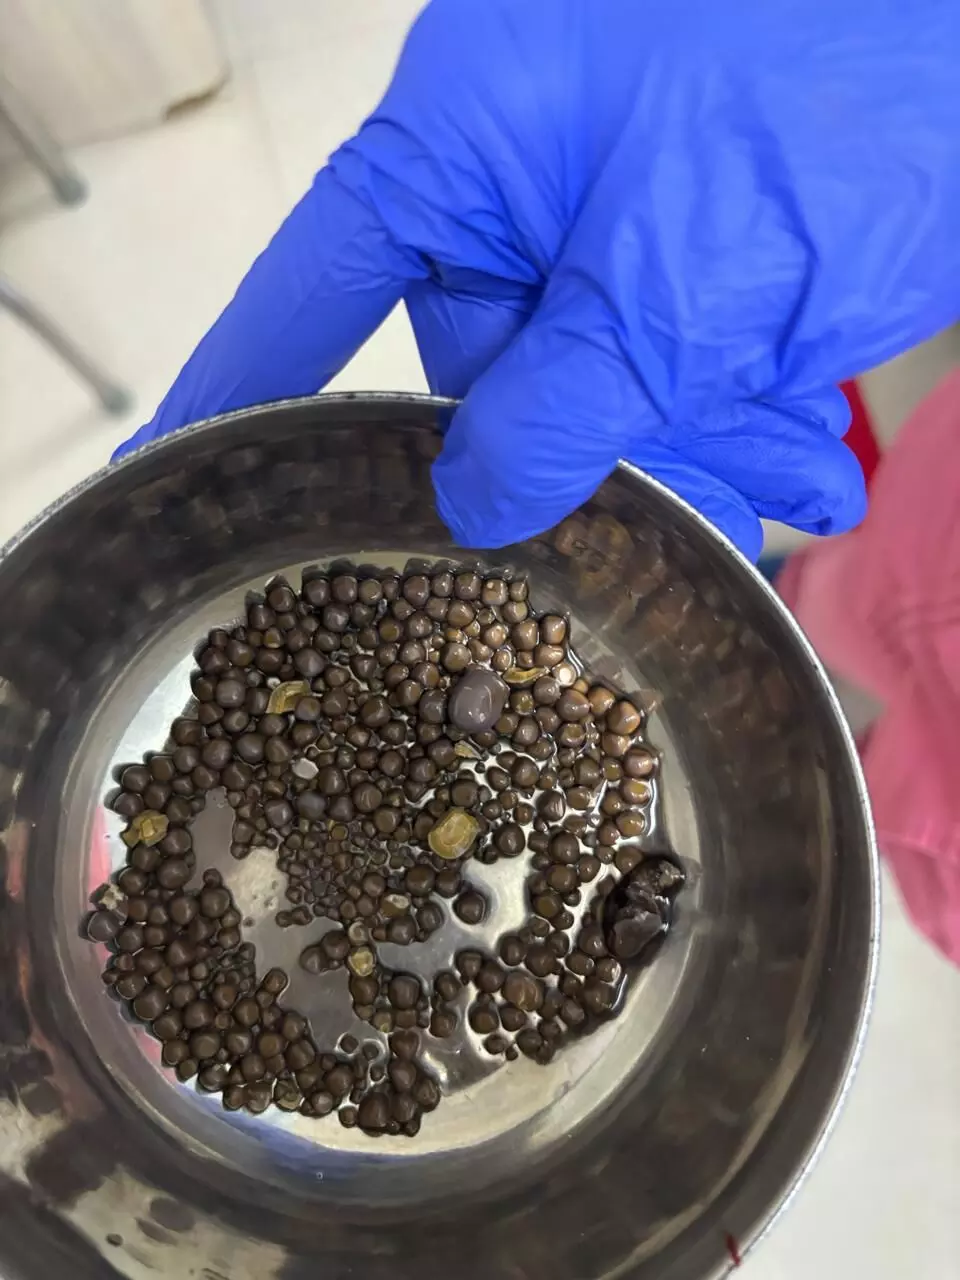 418 kidney stones removed from patient with 27% kidney function